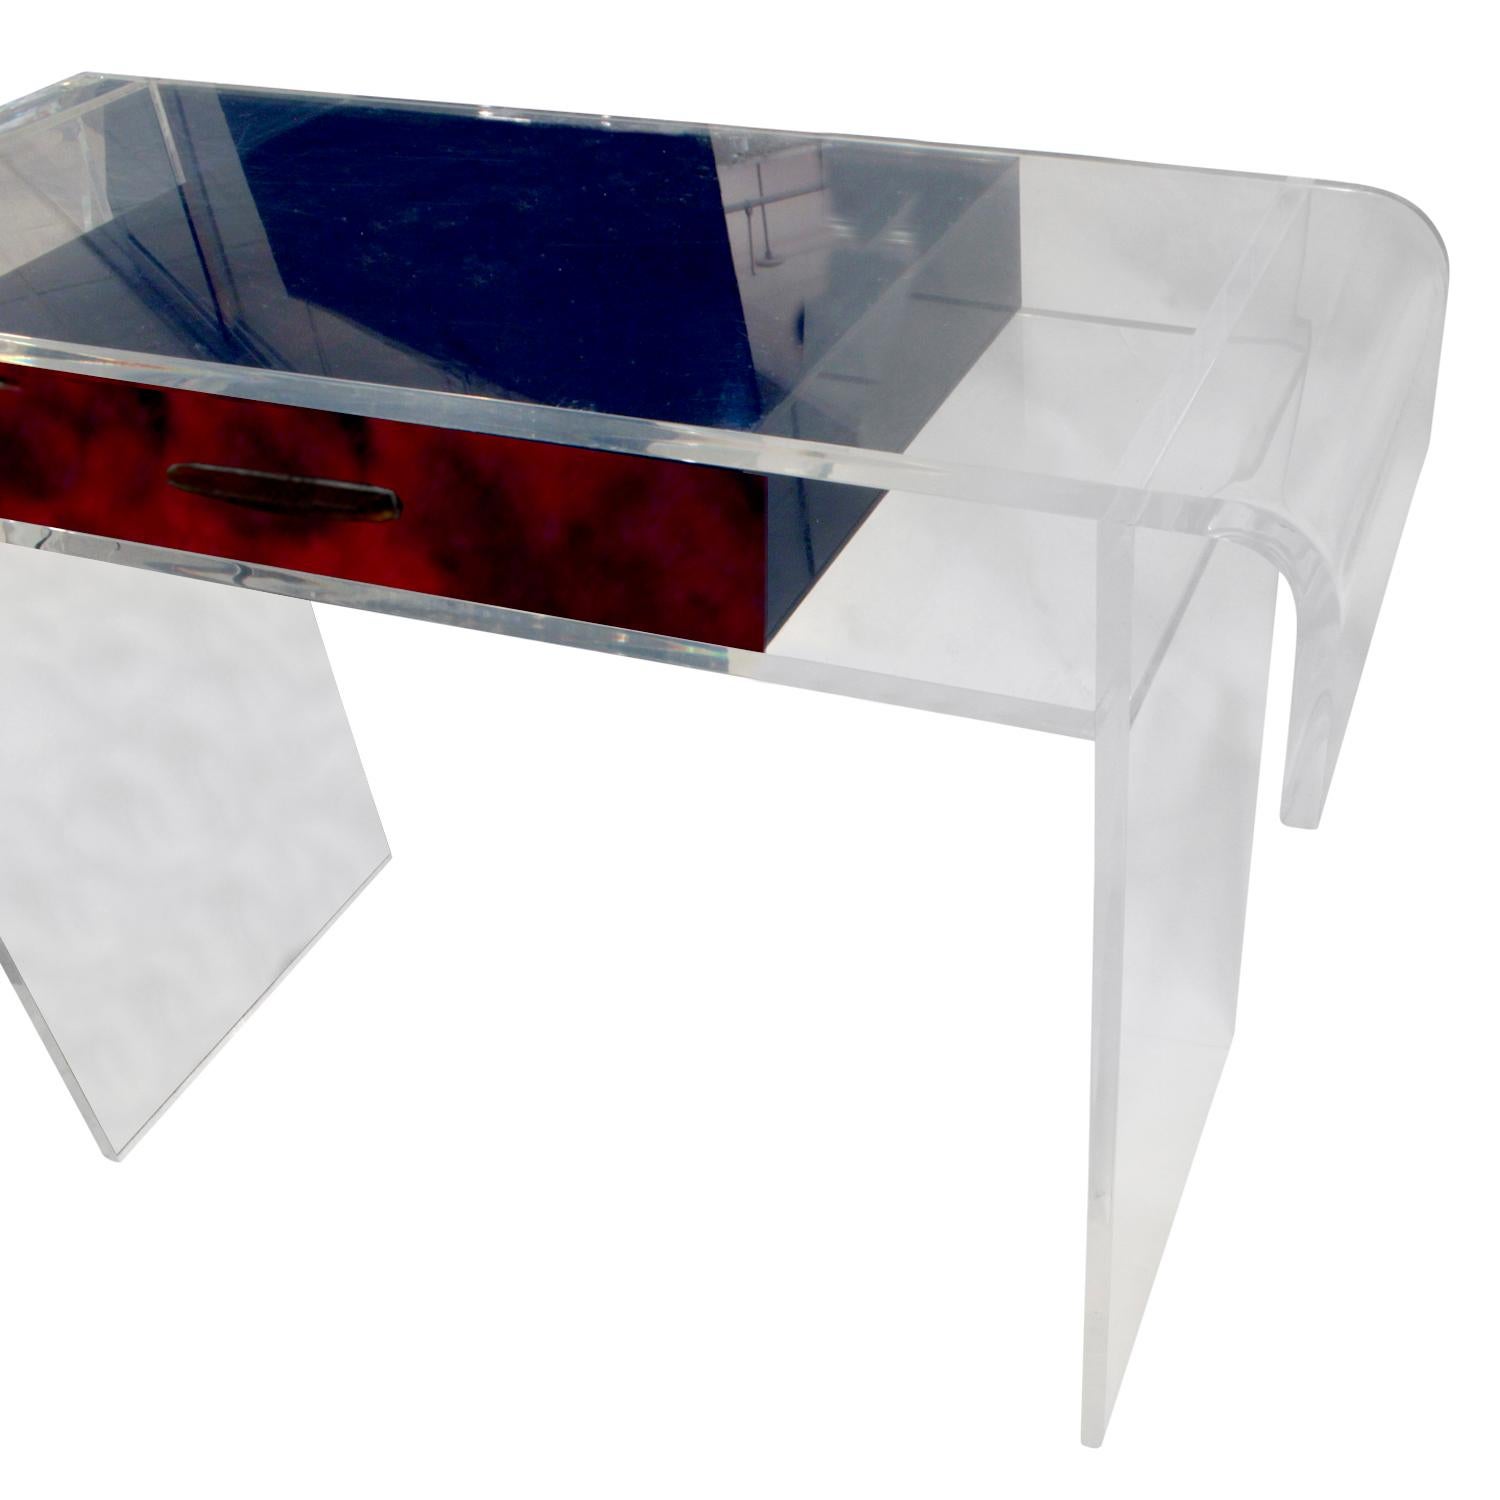 American Custom Lucite Desk or Vanity with Tortishell Lucite Drawer and Chair, 1970s